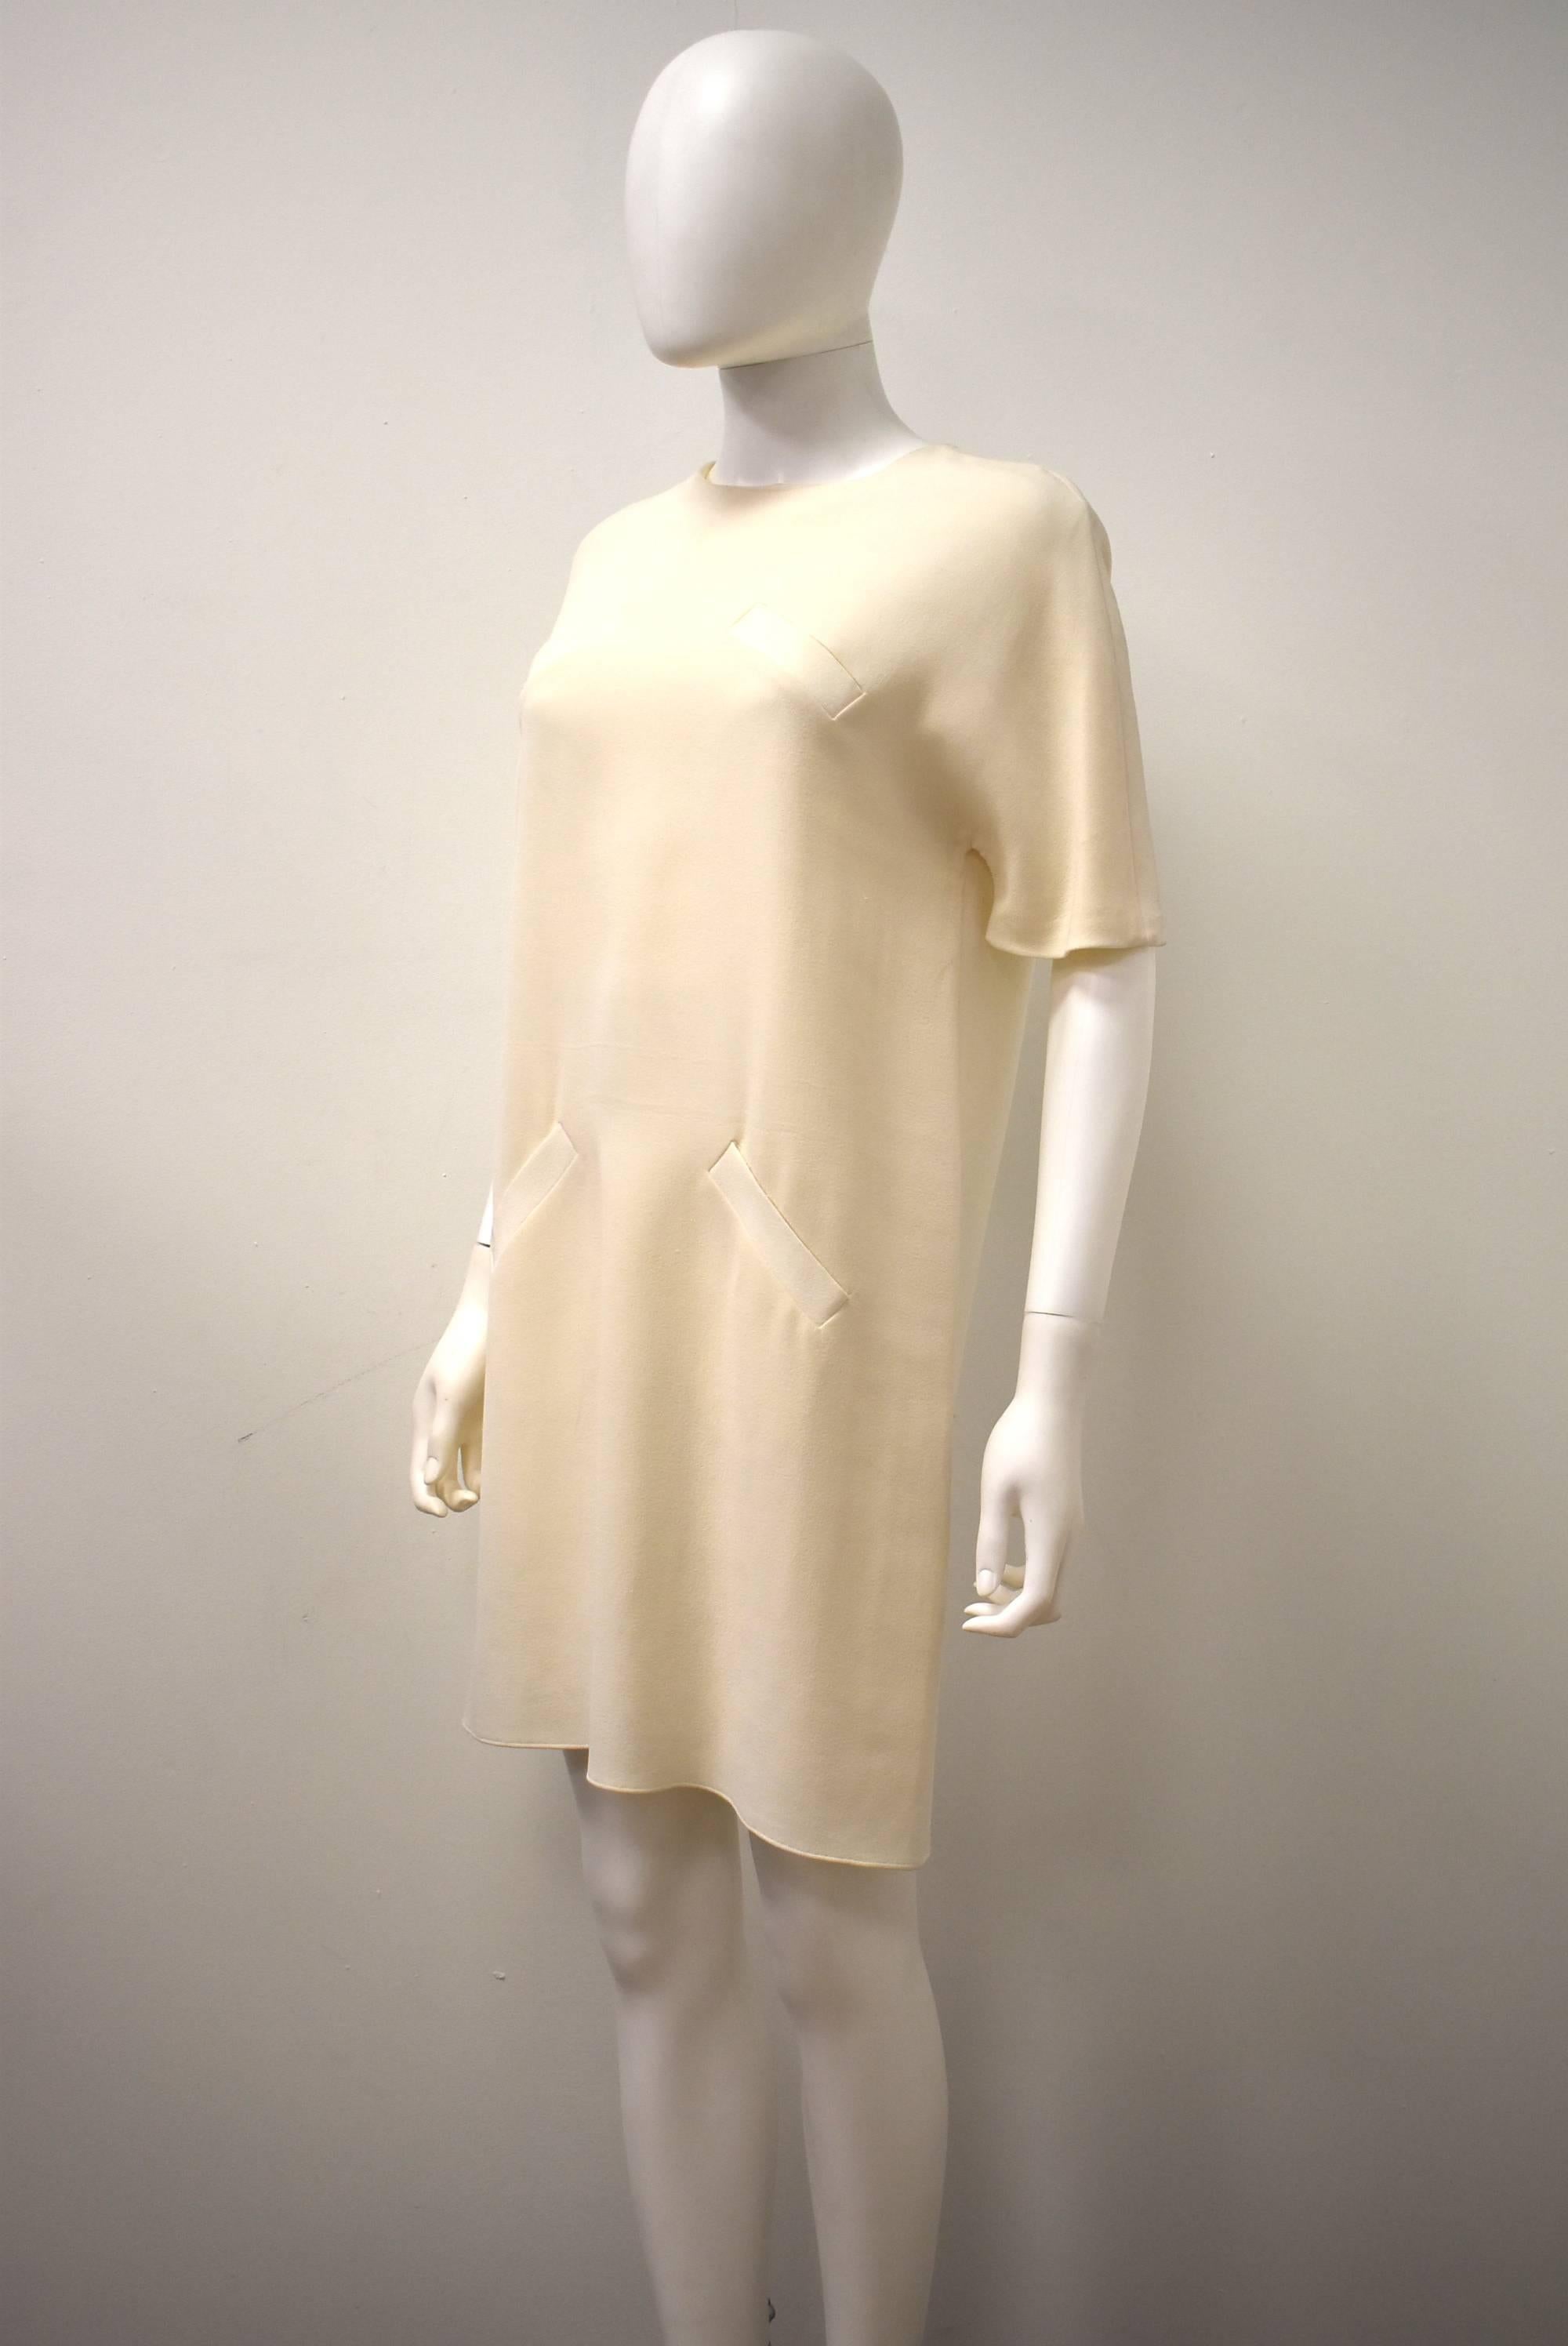 A beautiful and simple cream shift dress by Alexander Wang for Balenciaga from the …. collection. The dress is an elegant A-line shape, falling to just above the knees, with four pockets (two at the bust, and two at the hips) creating a modern twist